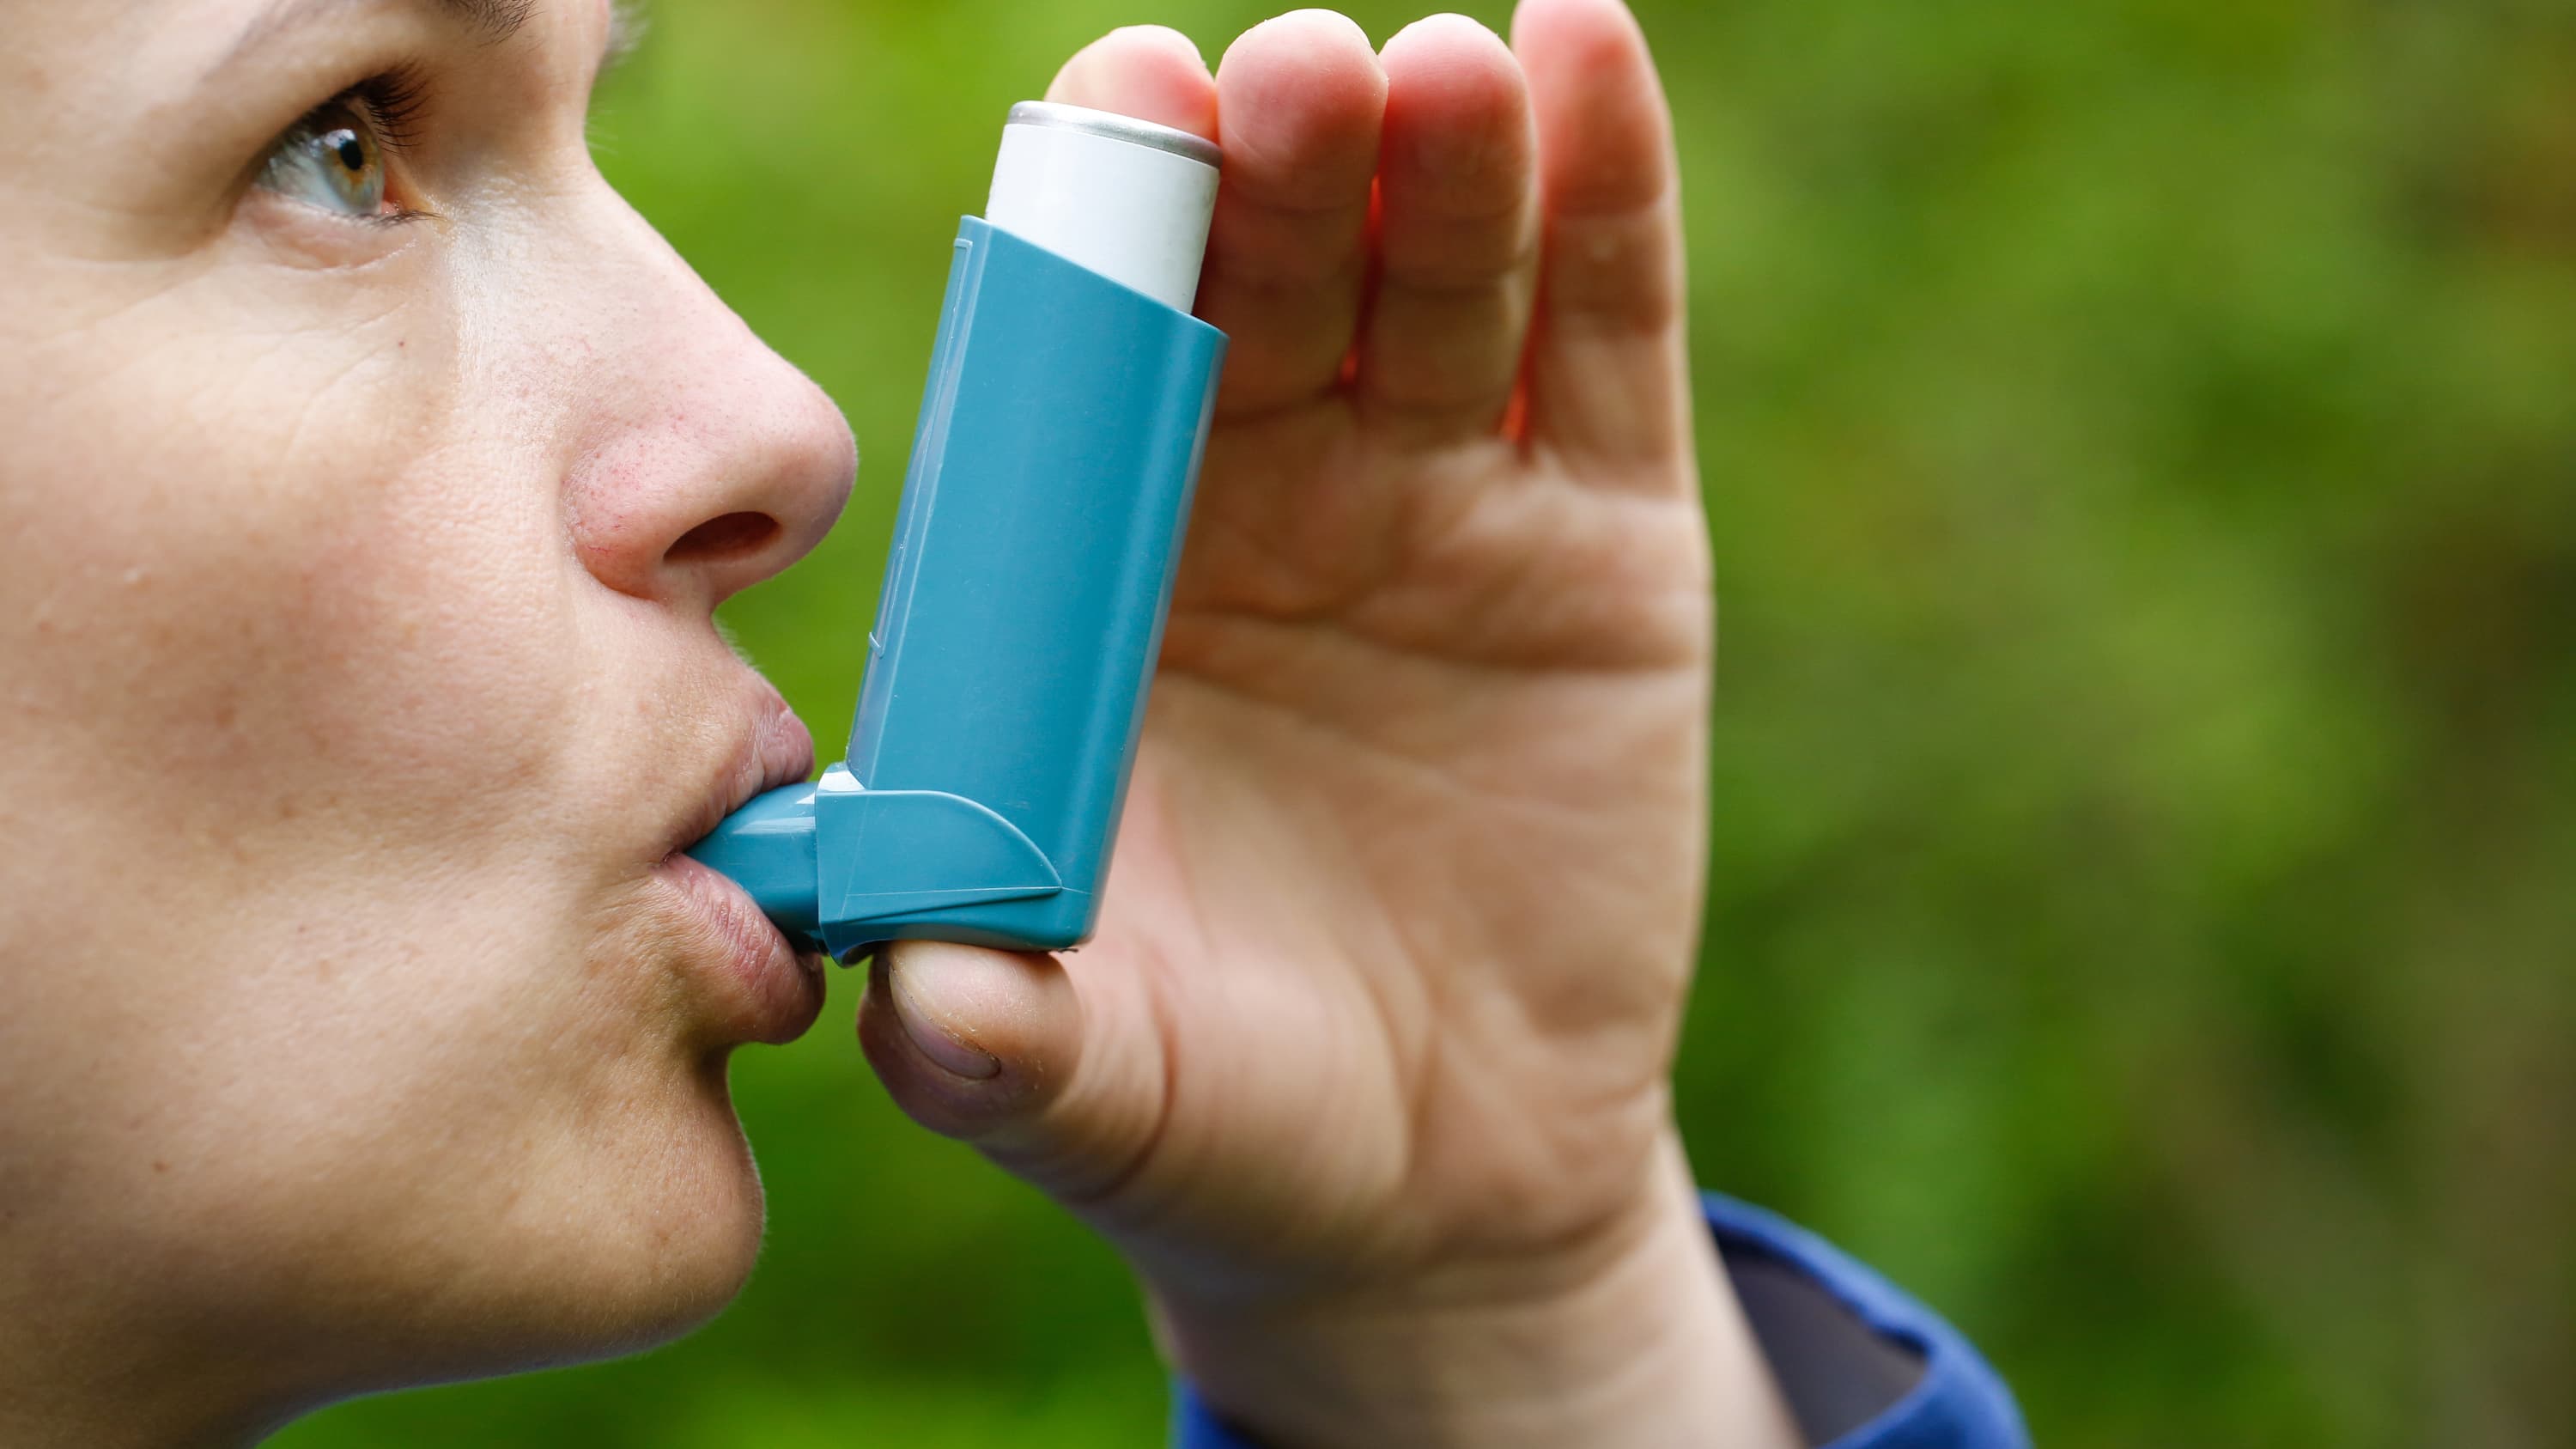 A woman with chronic obstructive pulmonary disease is using a blue inhaler.